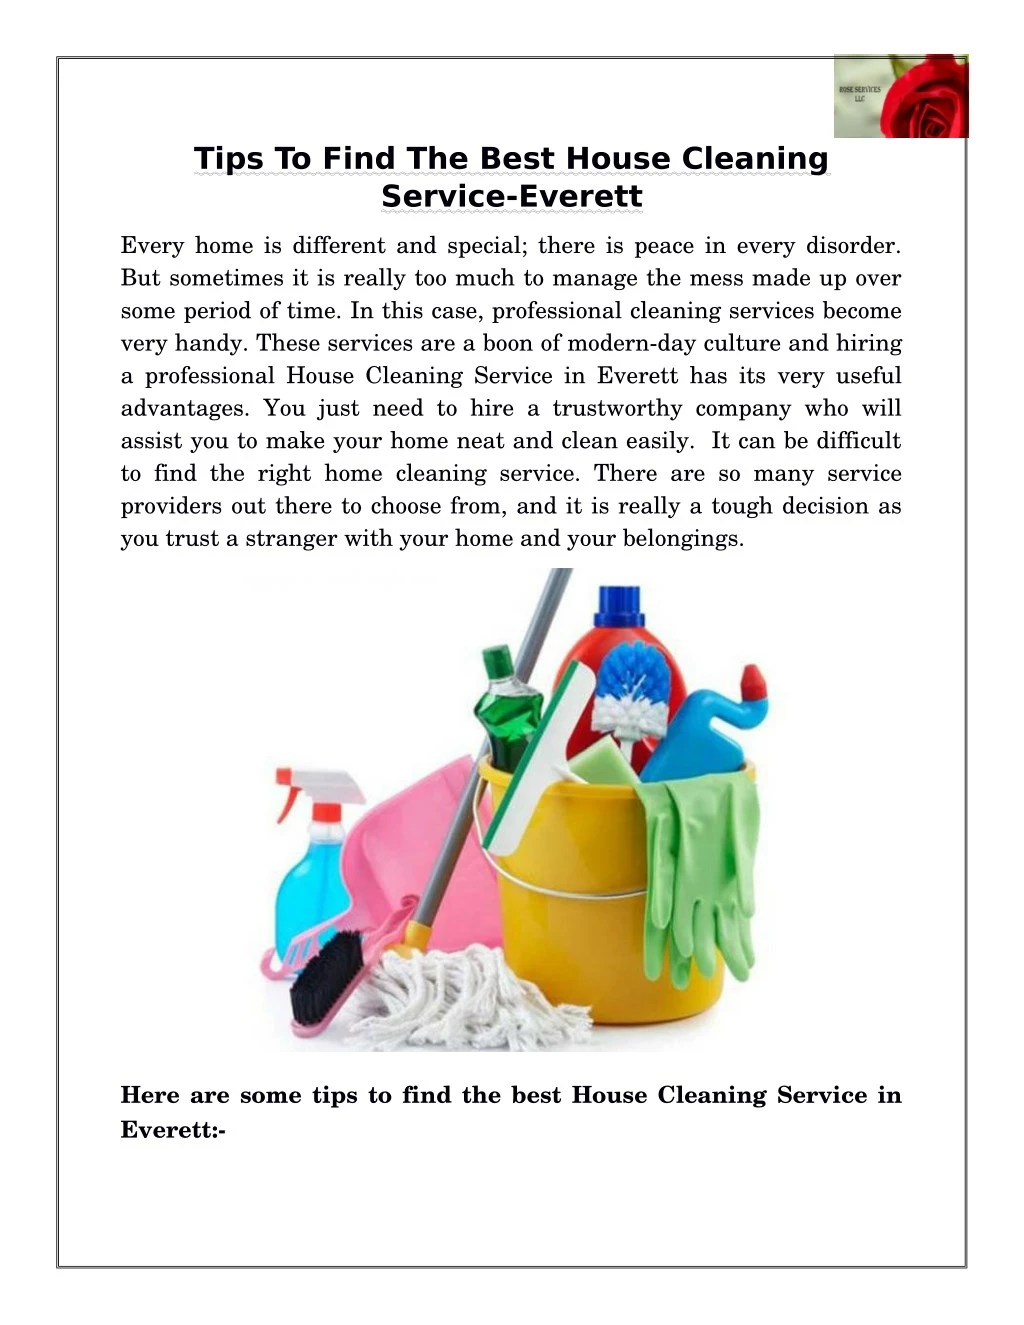 tips to find the best house cleaning service